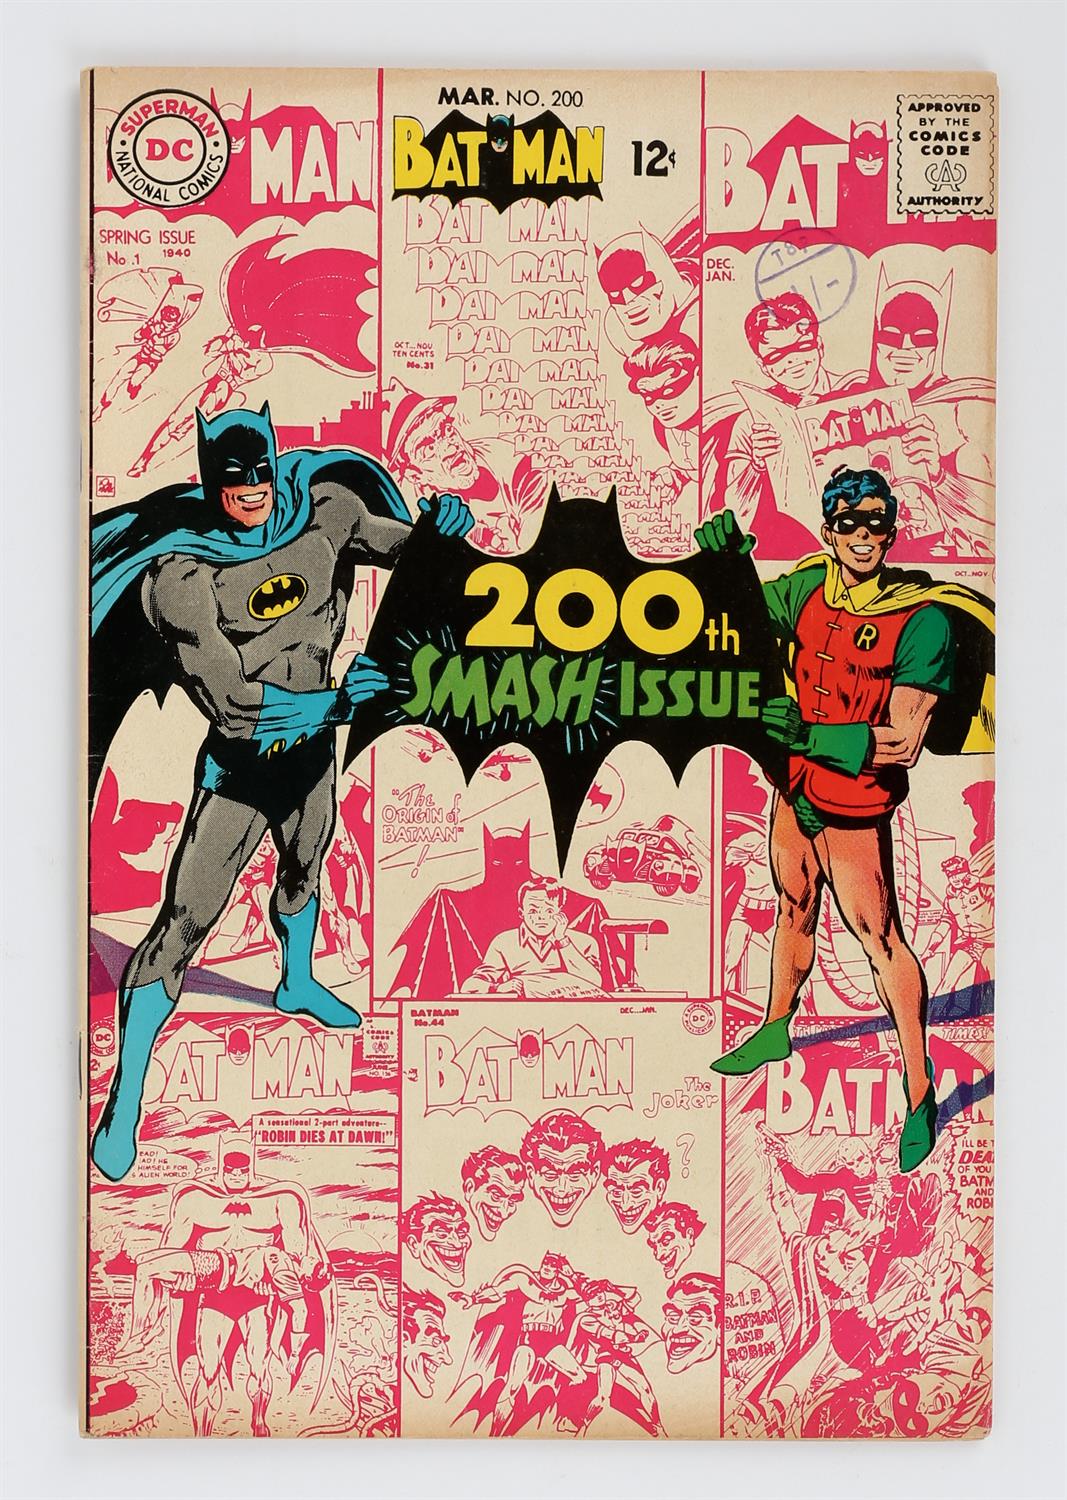 DC Comics: Batman No. 200 featuring the 1st work on Batman by Neal Adams (1968). This lot